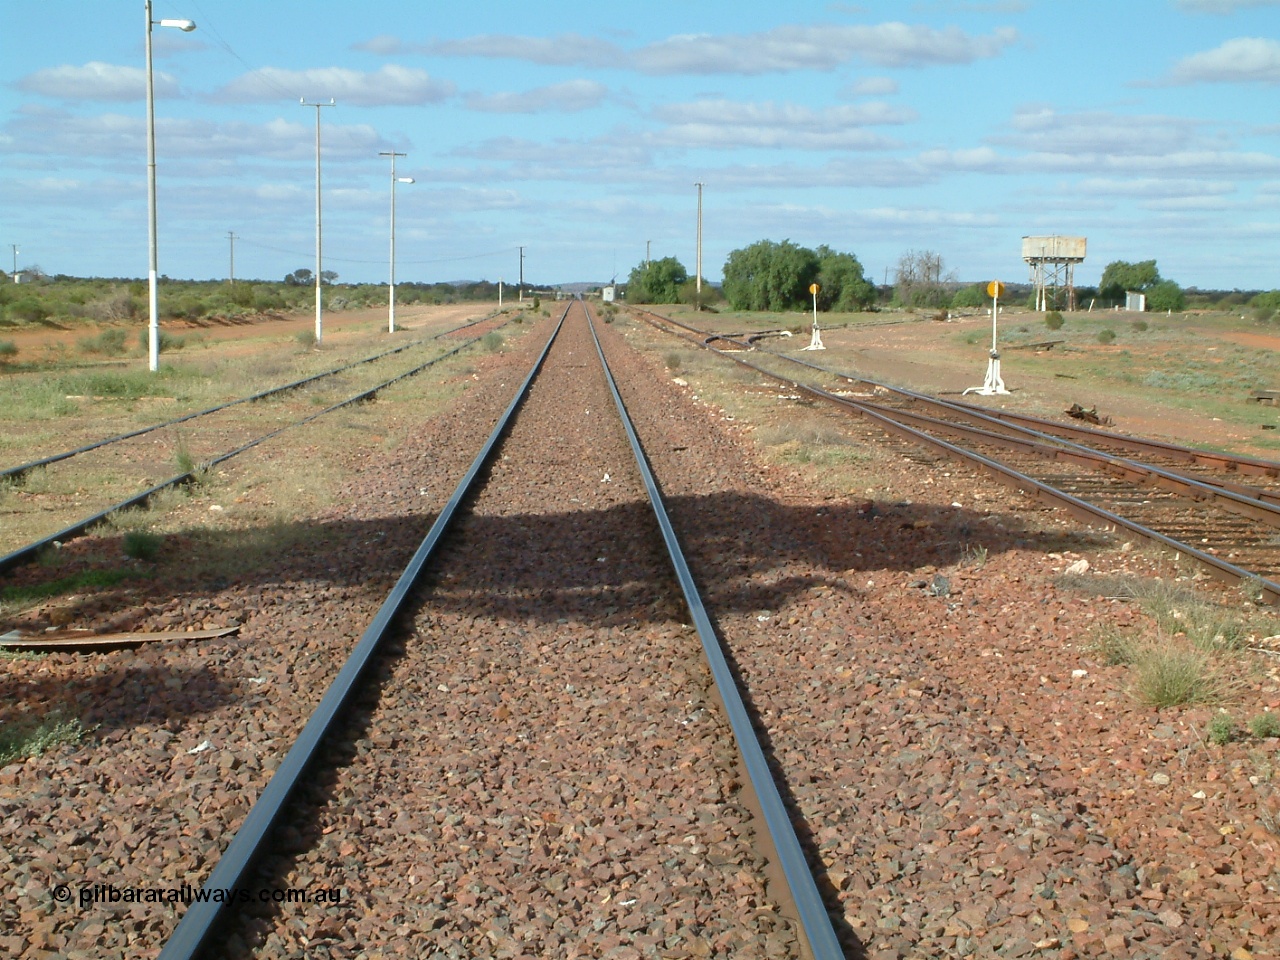 030415 154424
Tarcoola, at the 504.5 km, looking east along the Trans Australian Railway in the middle of the yard, the Central Australian Railway is on the left, loop on the right, east leg of triangle is just in view with the sidings running east behind the large tree and water tank. Tarcoola is the junction for the TAR and CAR railways situated 504 km from the 0 km datum at Coonamia. [url=https://goo.gl/maps/cWayk3LD2QQjX6Z88]GeoData location[/url]. 15th April 2003.
